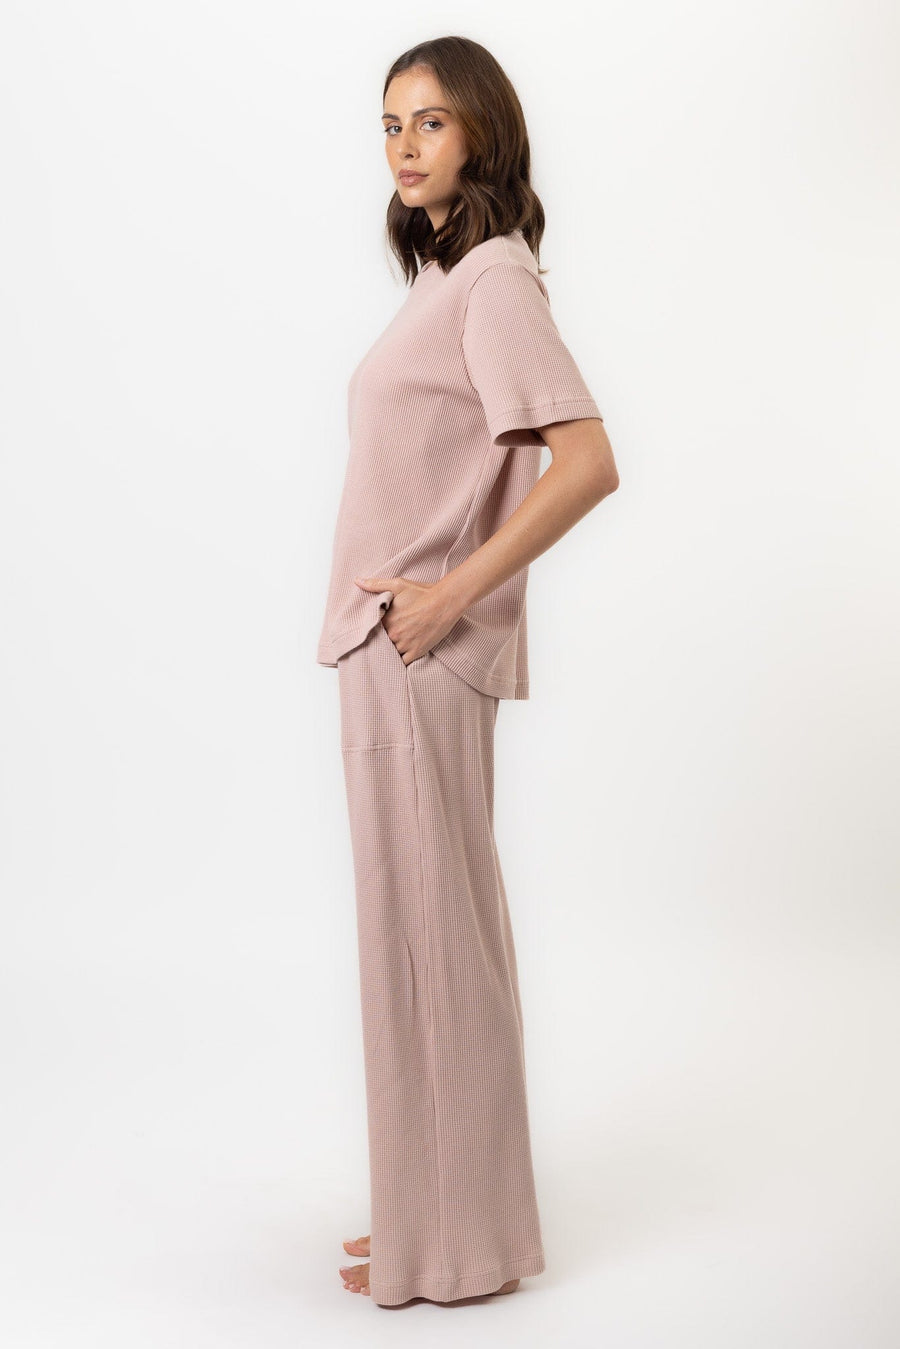 Melodic Pant | Dusty Pink Melodic Pant Lounge Pants Pajamas Australia Online | Reverie the Label  BOTTOMS Melodic Pant